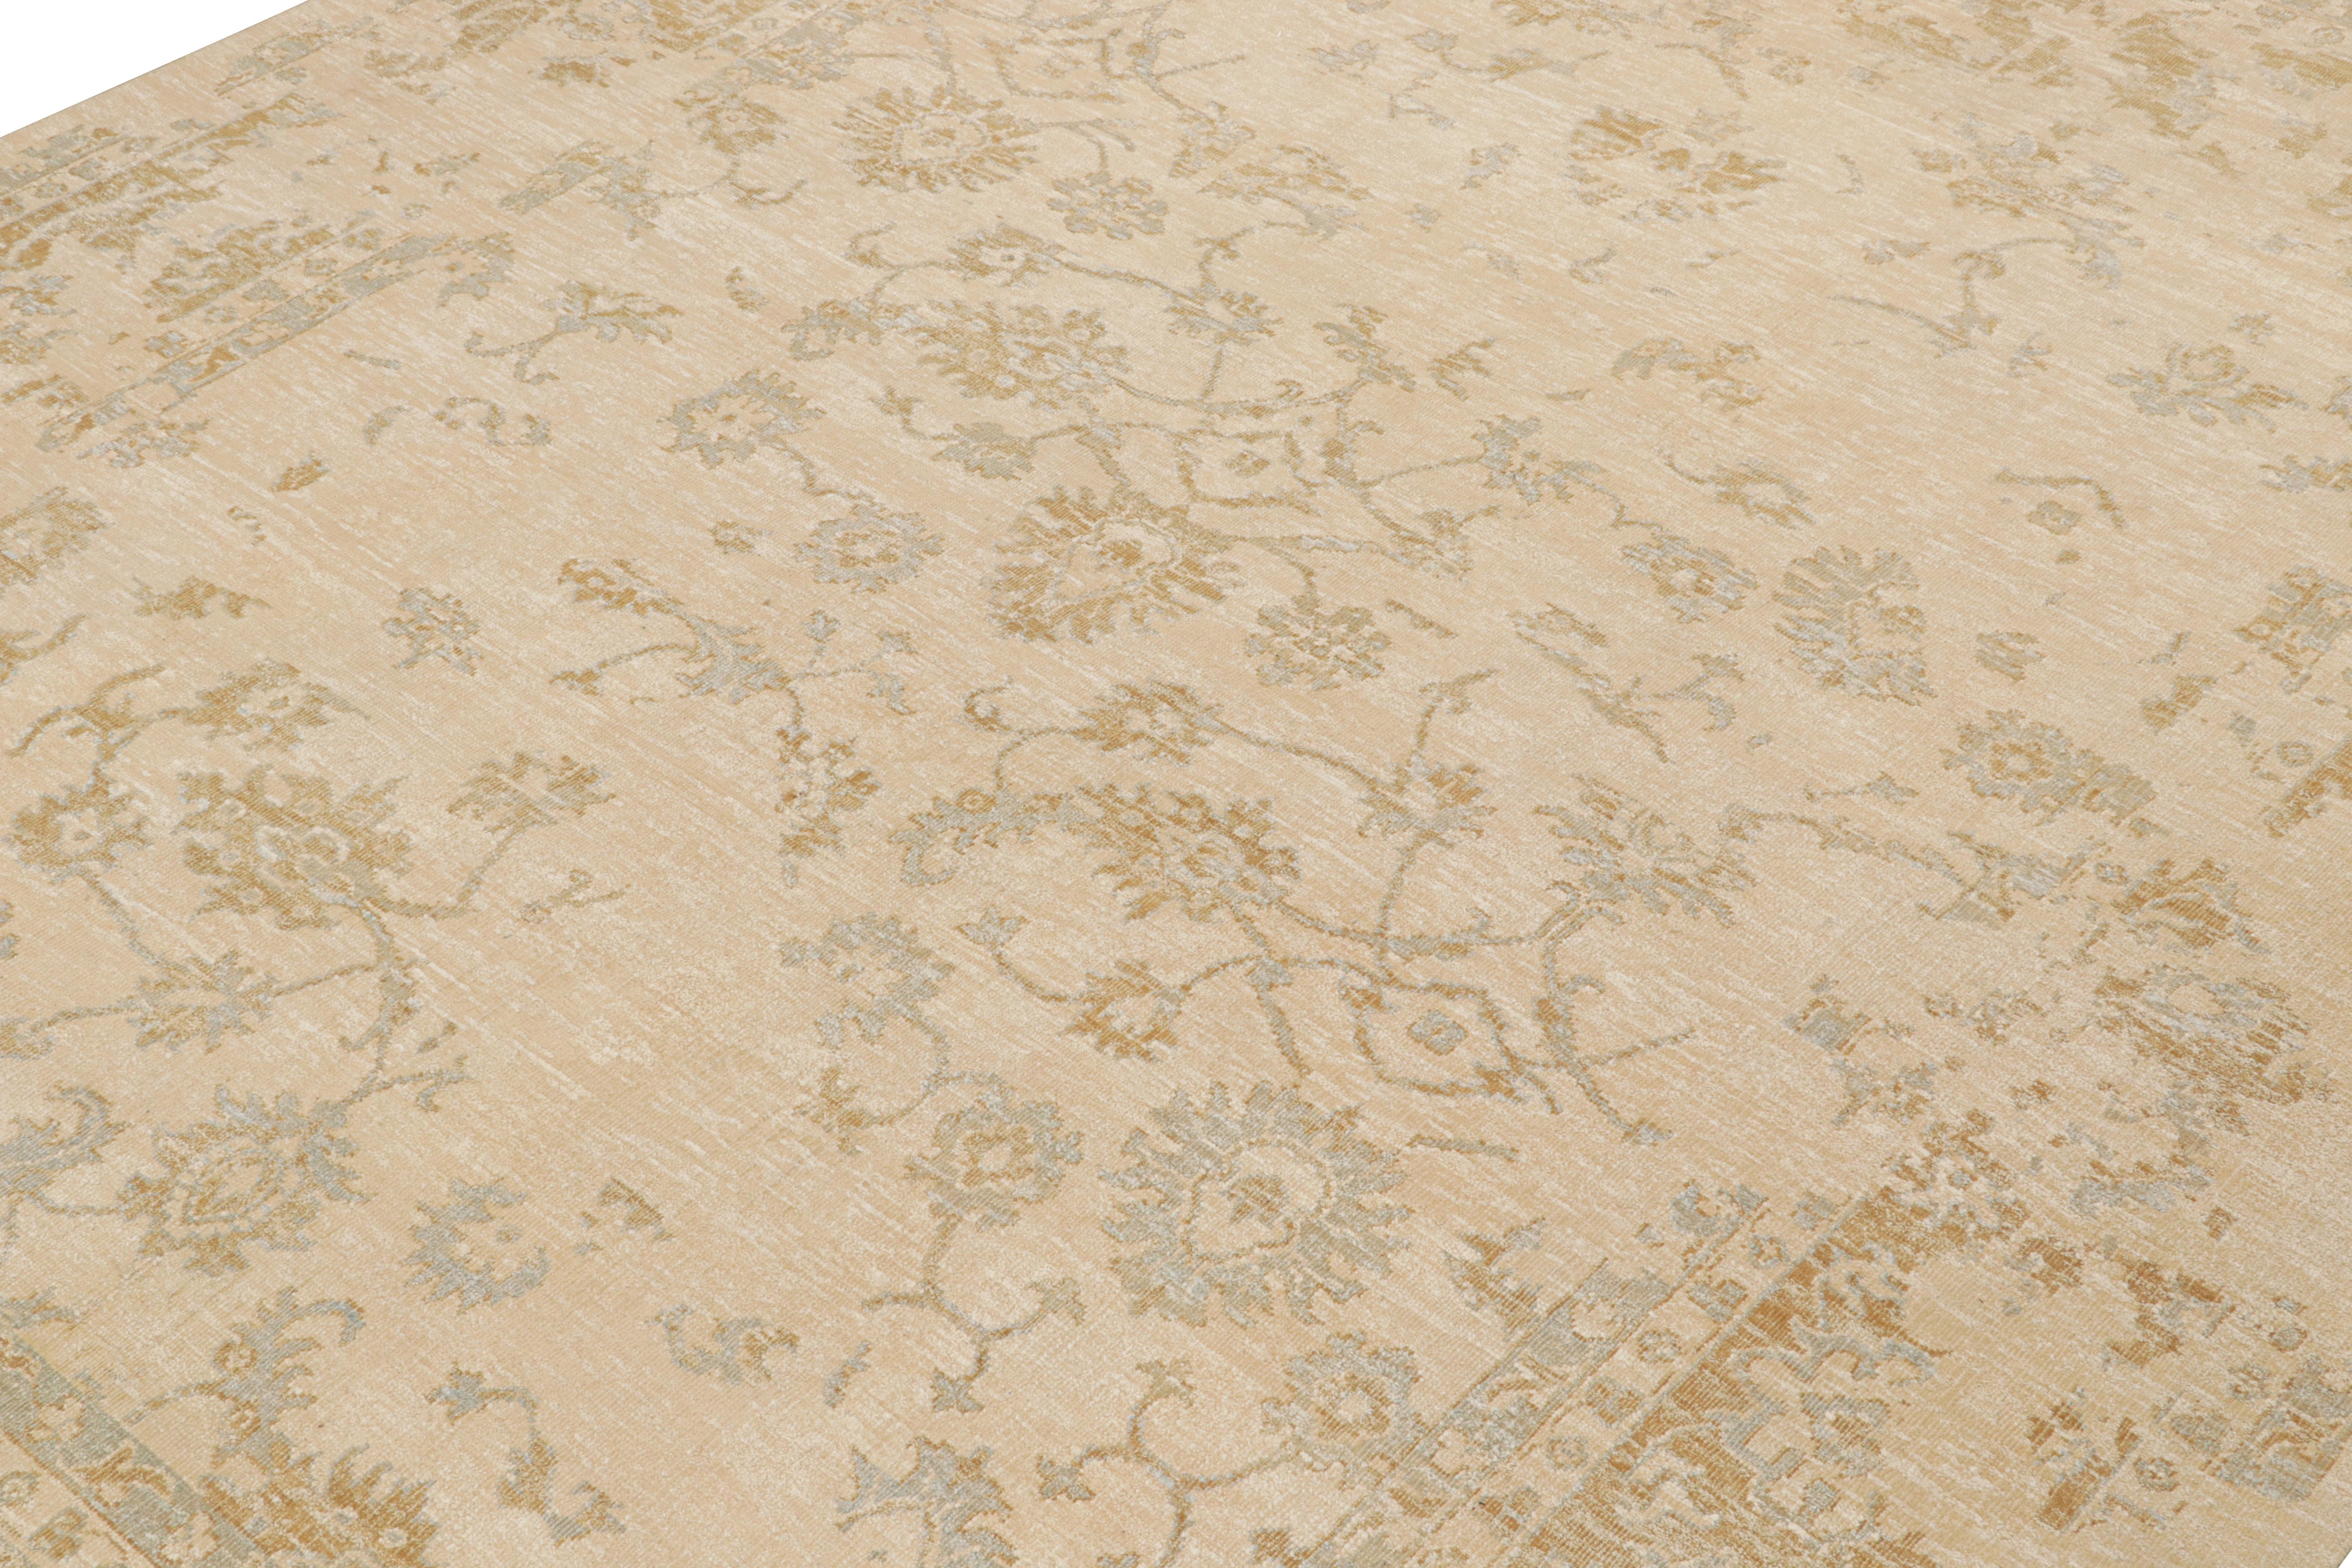 Hand-Knotted Rug & Kilim’s Oushak Style Rug in Cream with Gold and Blue Floral Patterns For Sale